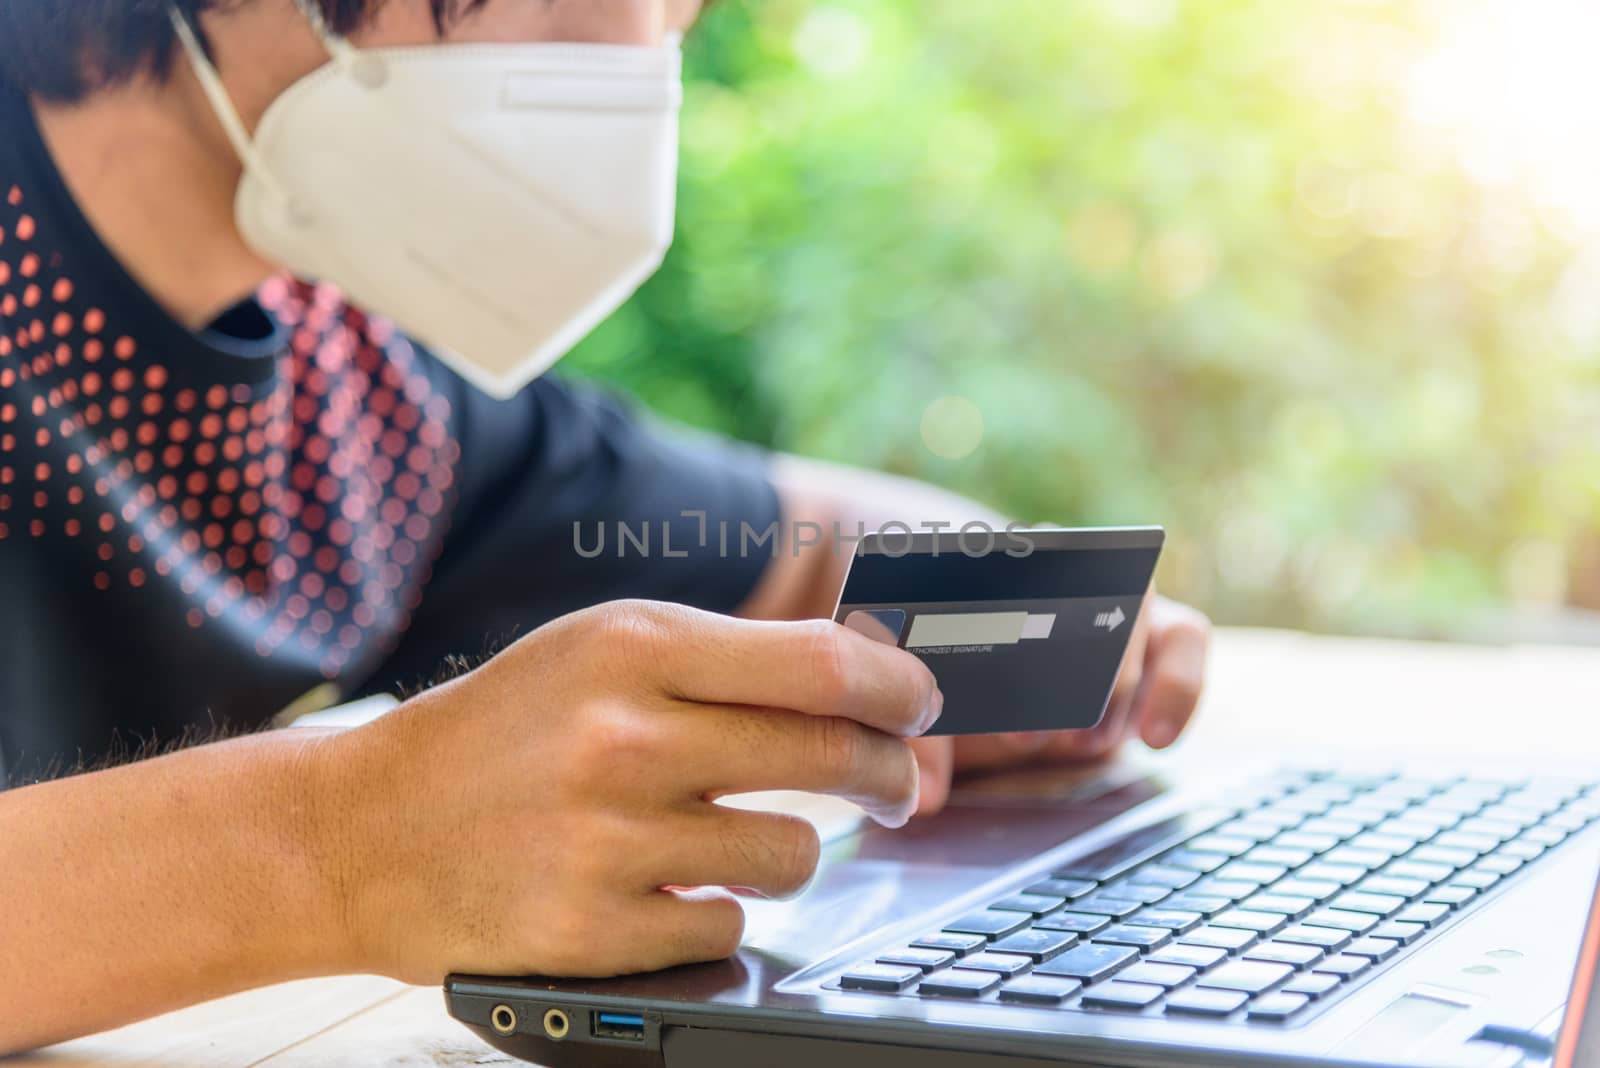 shoping from home in quarantine time/ the man wear mask and holding the credit card for shopping online in website